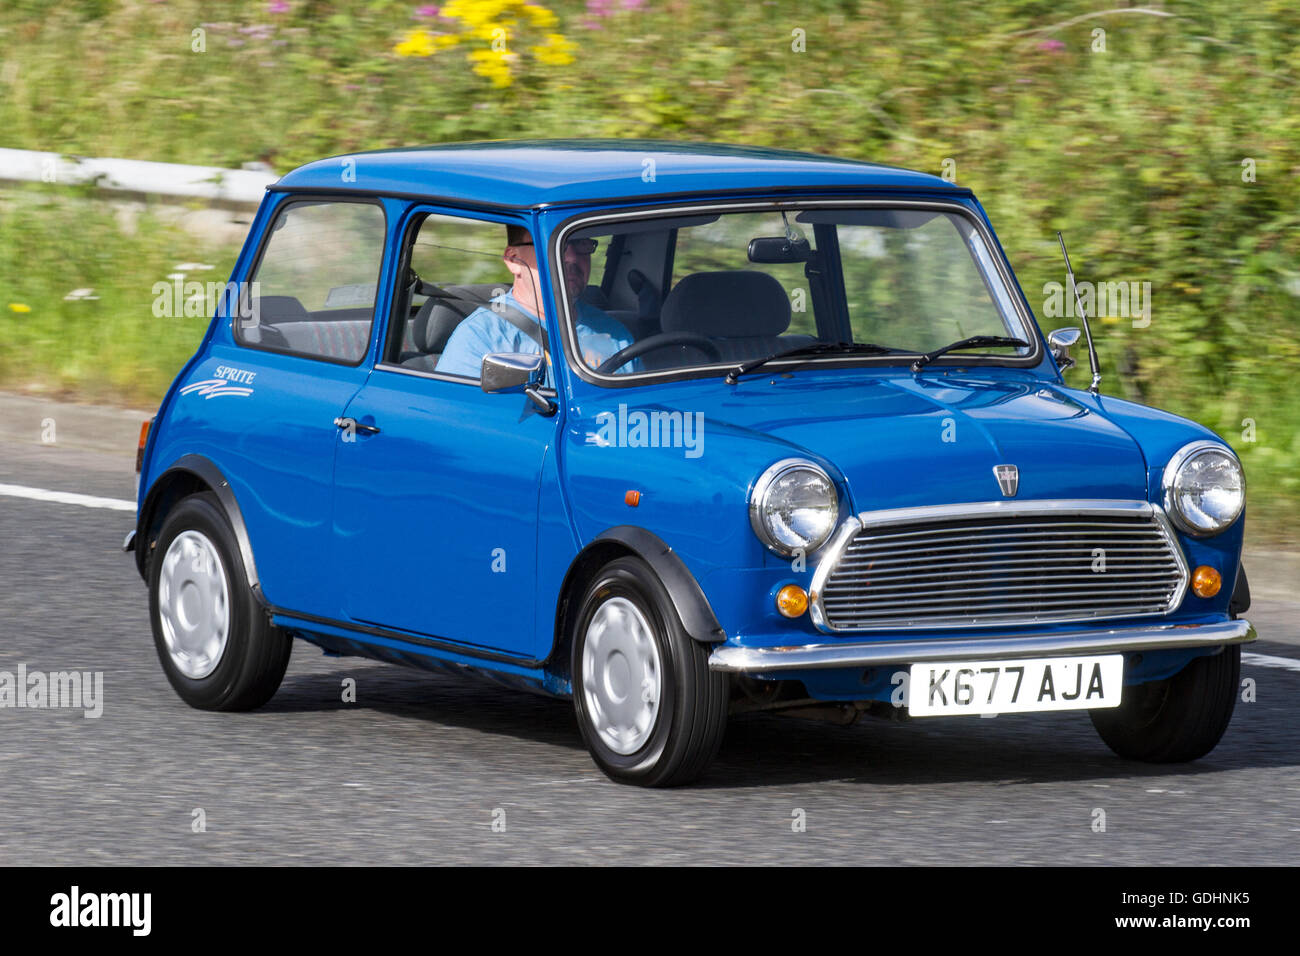 1993 90s nineties blue Rover Mini Sprite; Fleetwood car show, cars vintage antique restored vehicles, show festival restoration, classic cars, cherished, veteran, old timer, restored, collectable, motors, vintage, heritage, old preserved classic classics autos automobile. Stock Photo